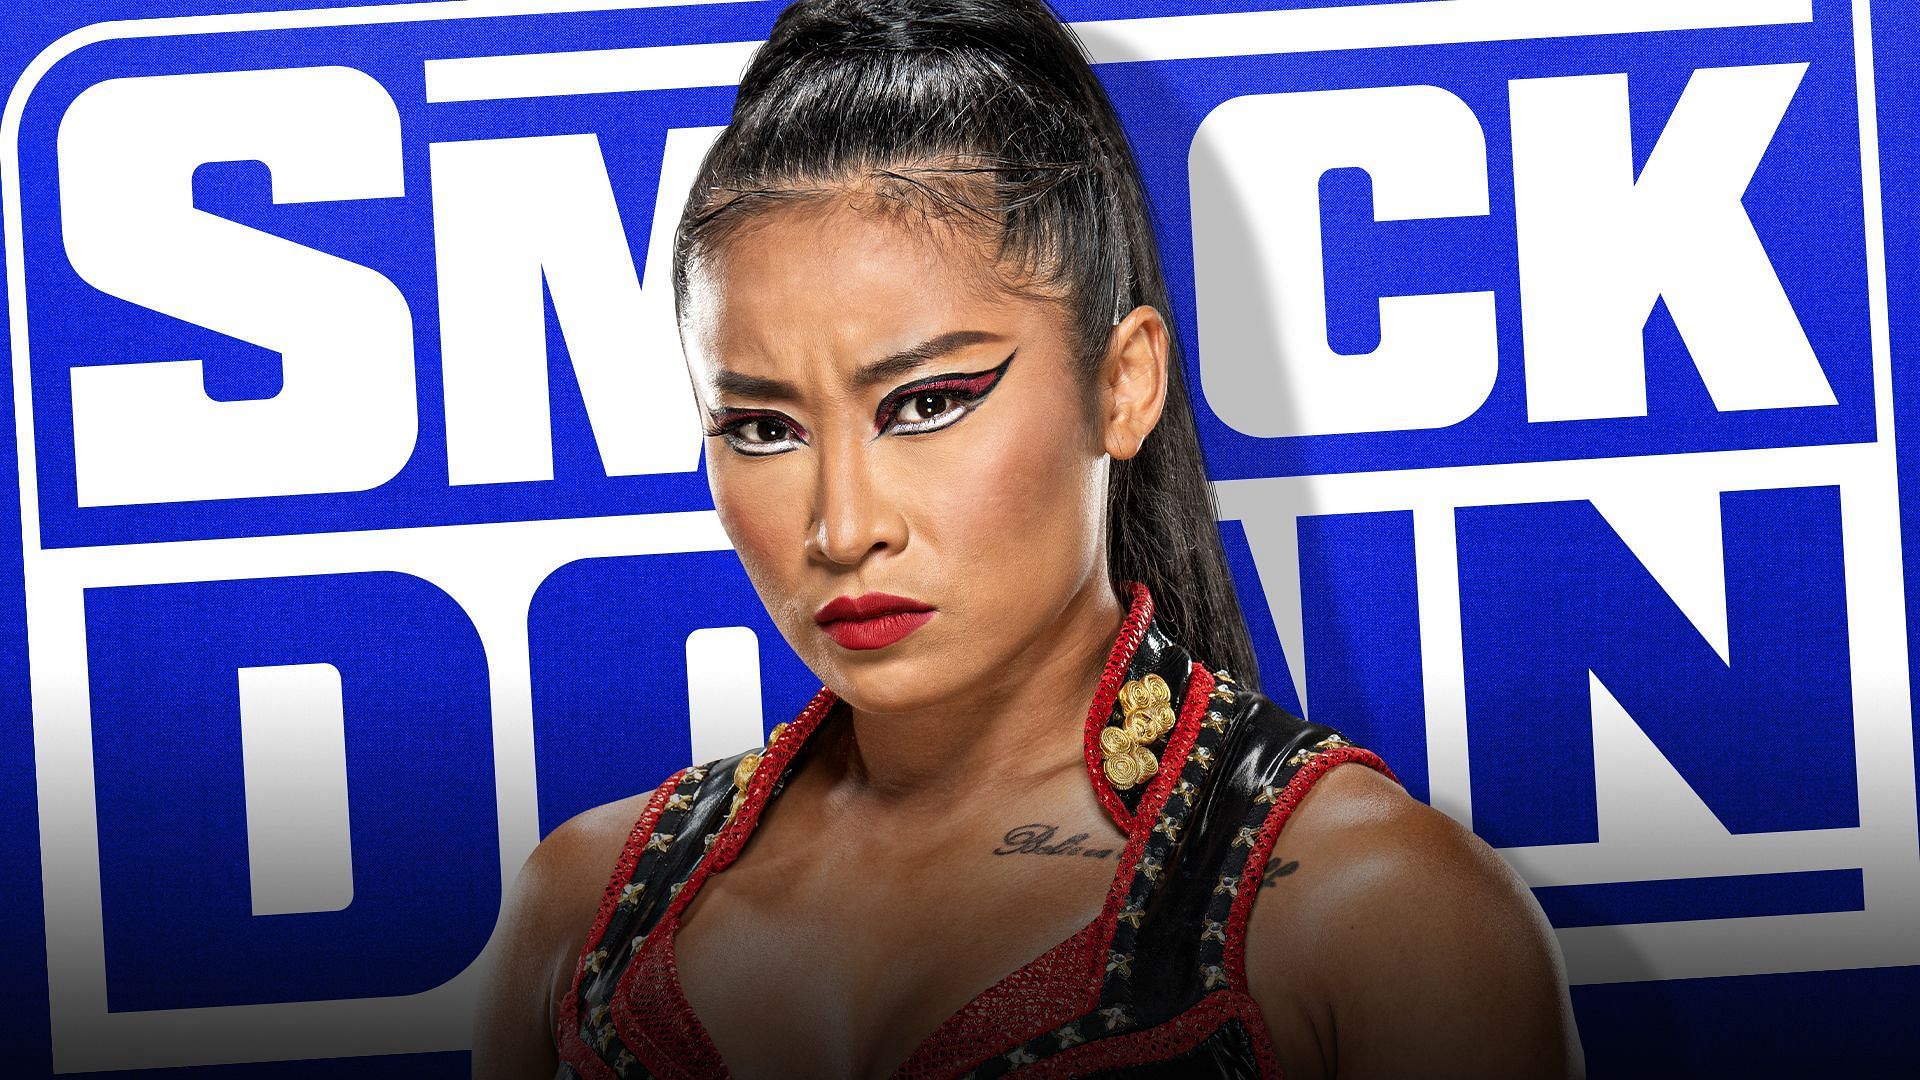 Xia Li made a successful debut in her first official match on SmackDown.